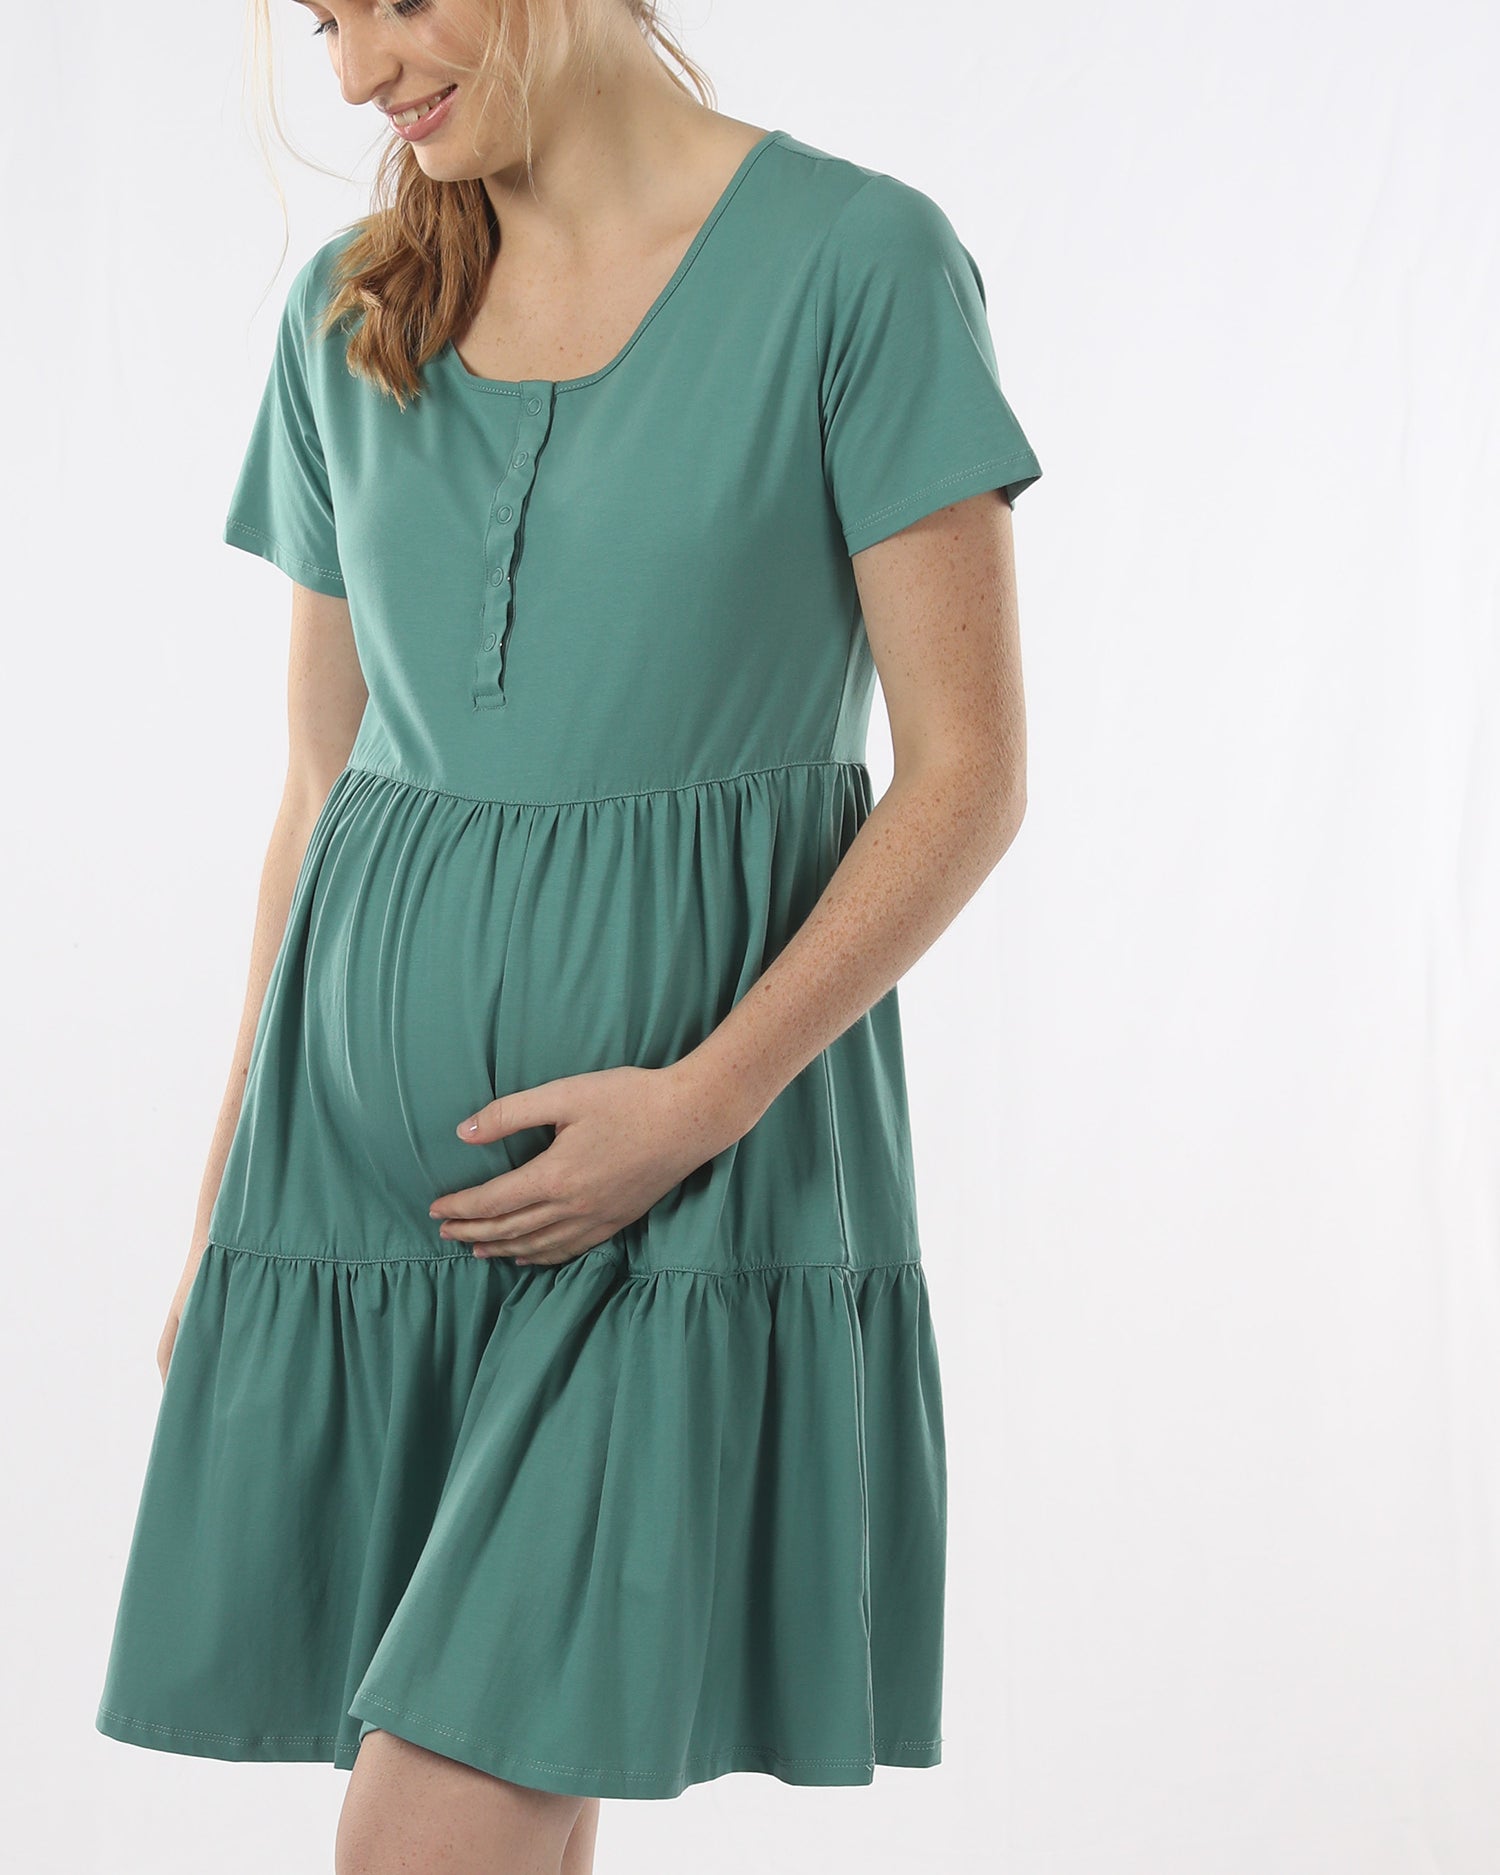 Side View - A pregnant Woman in Sage Green Maternity Tiered Dress